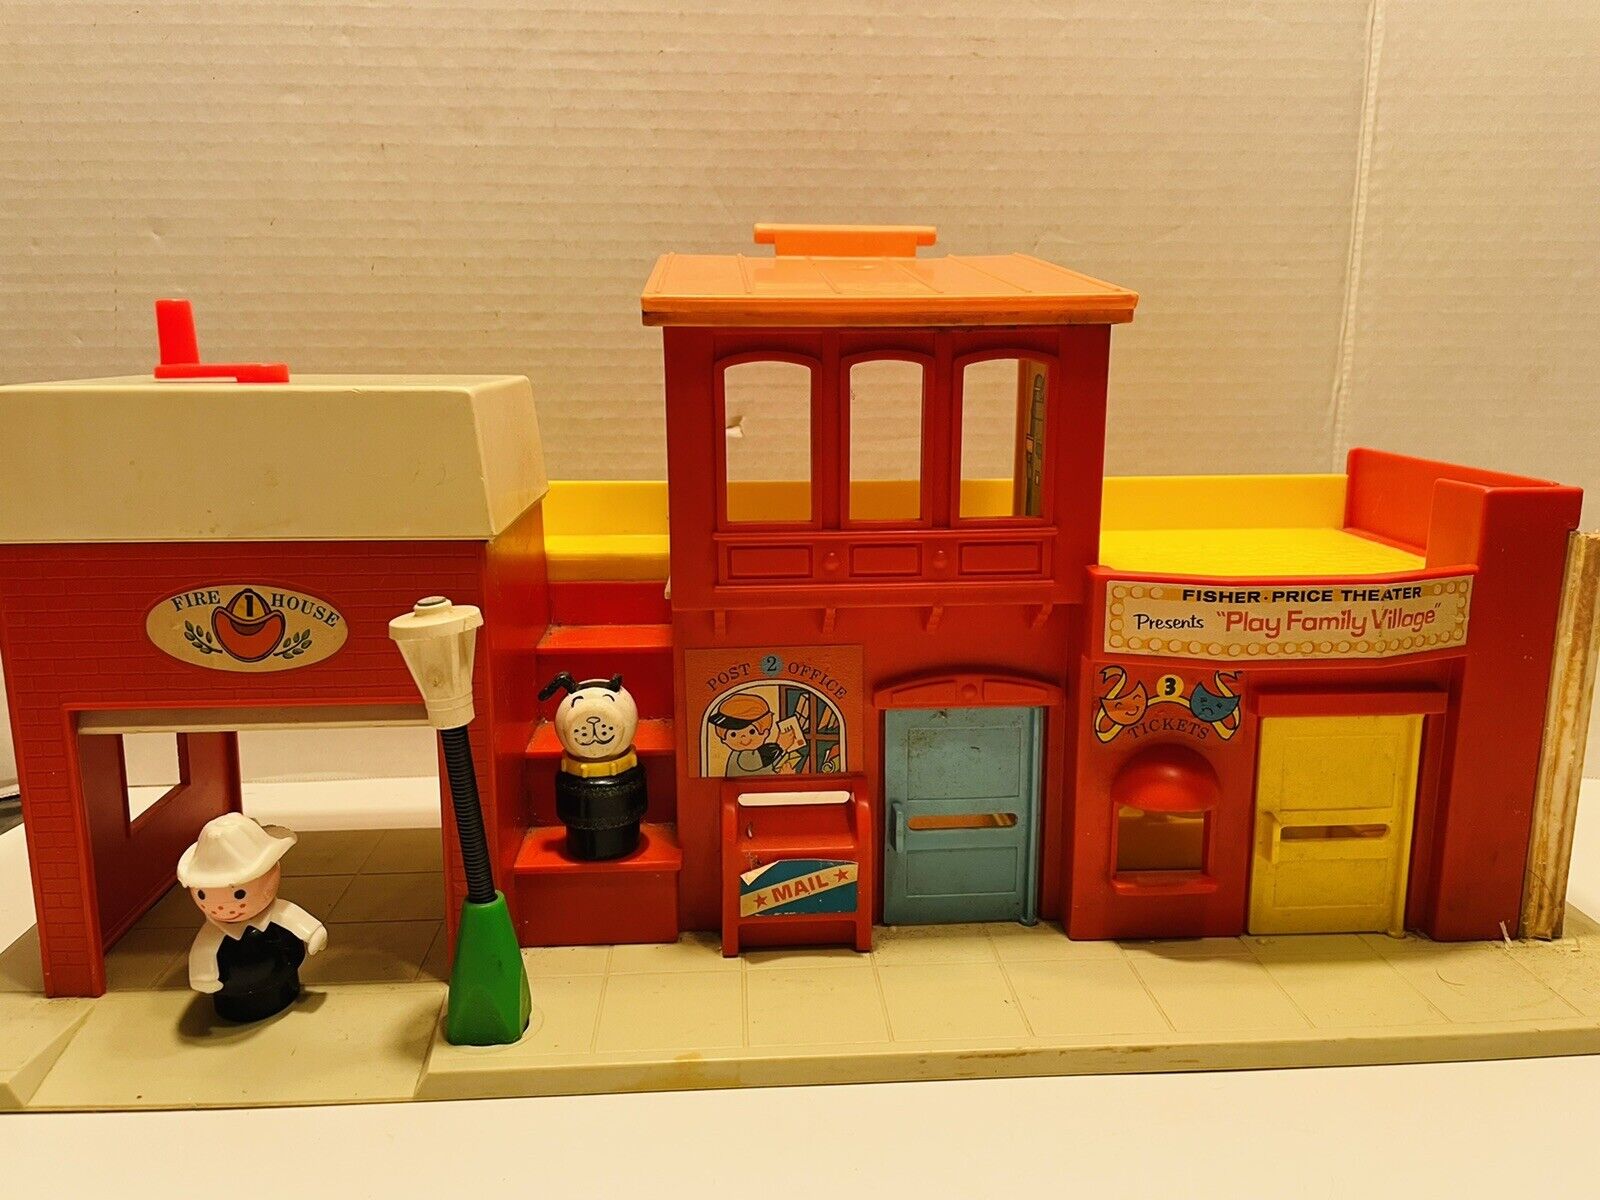 Vintage 1973 Fisher Price Ranking TOP7 Theatre Building Popular Play Village Family